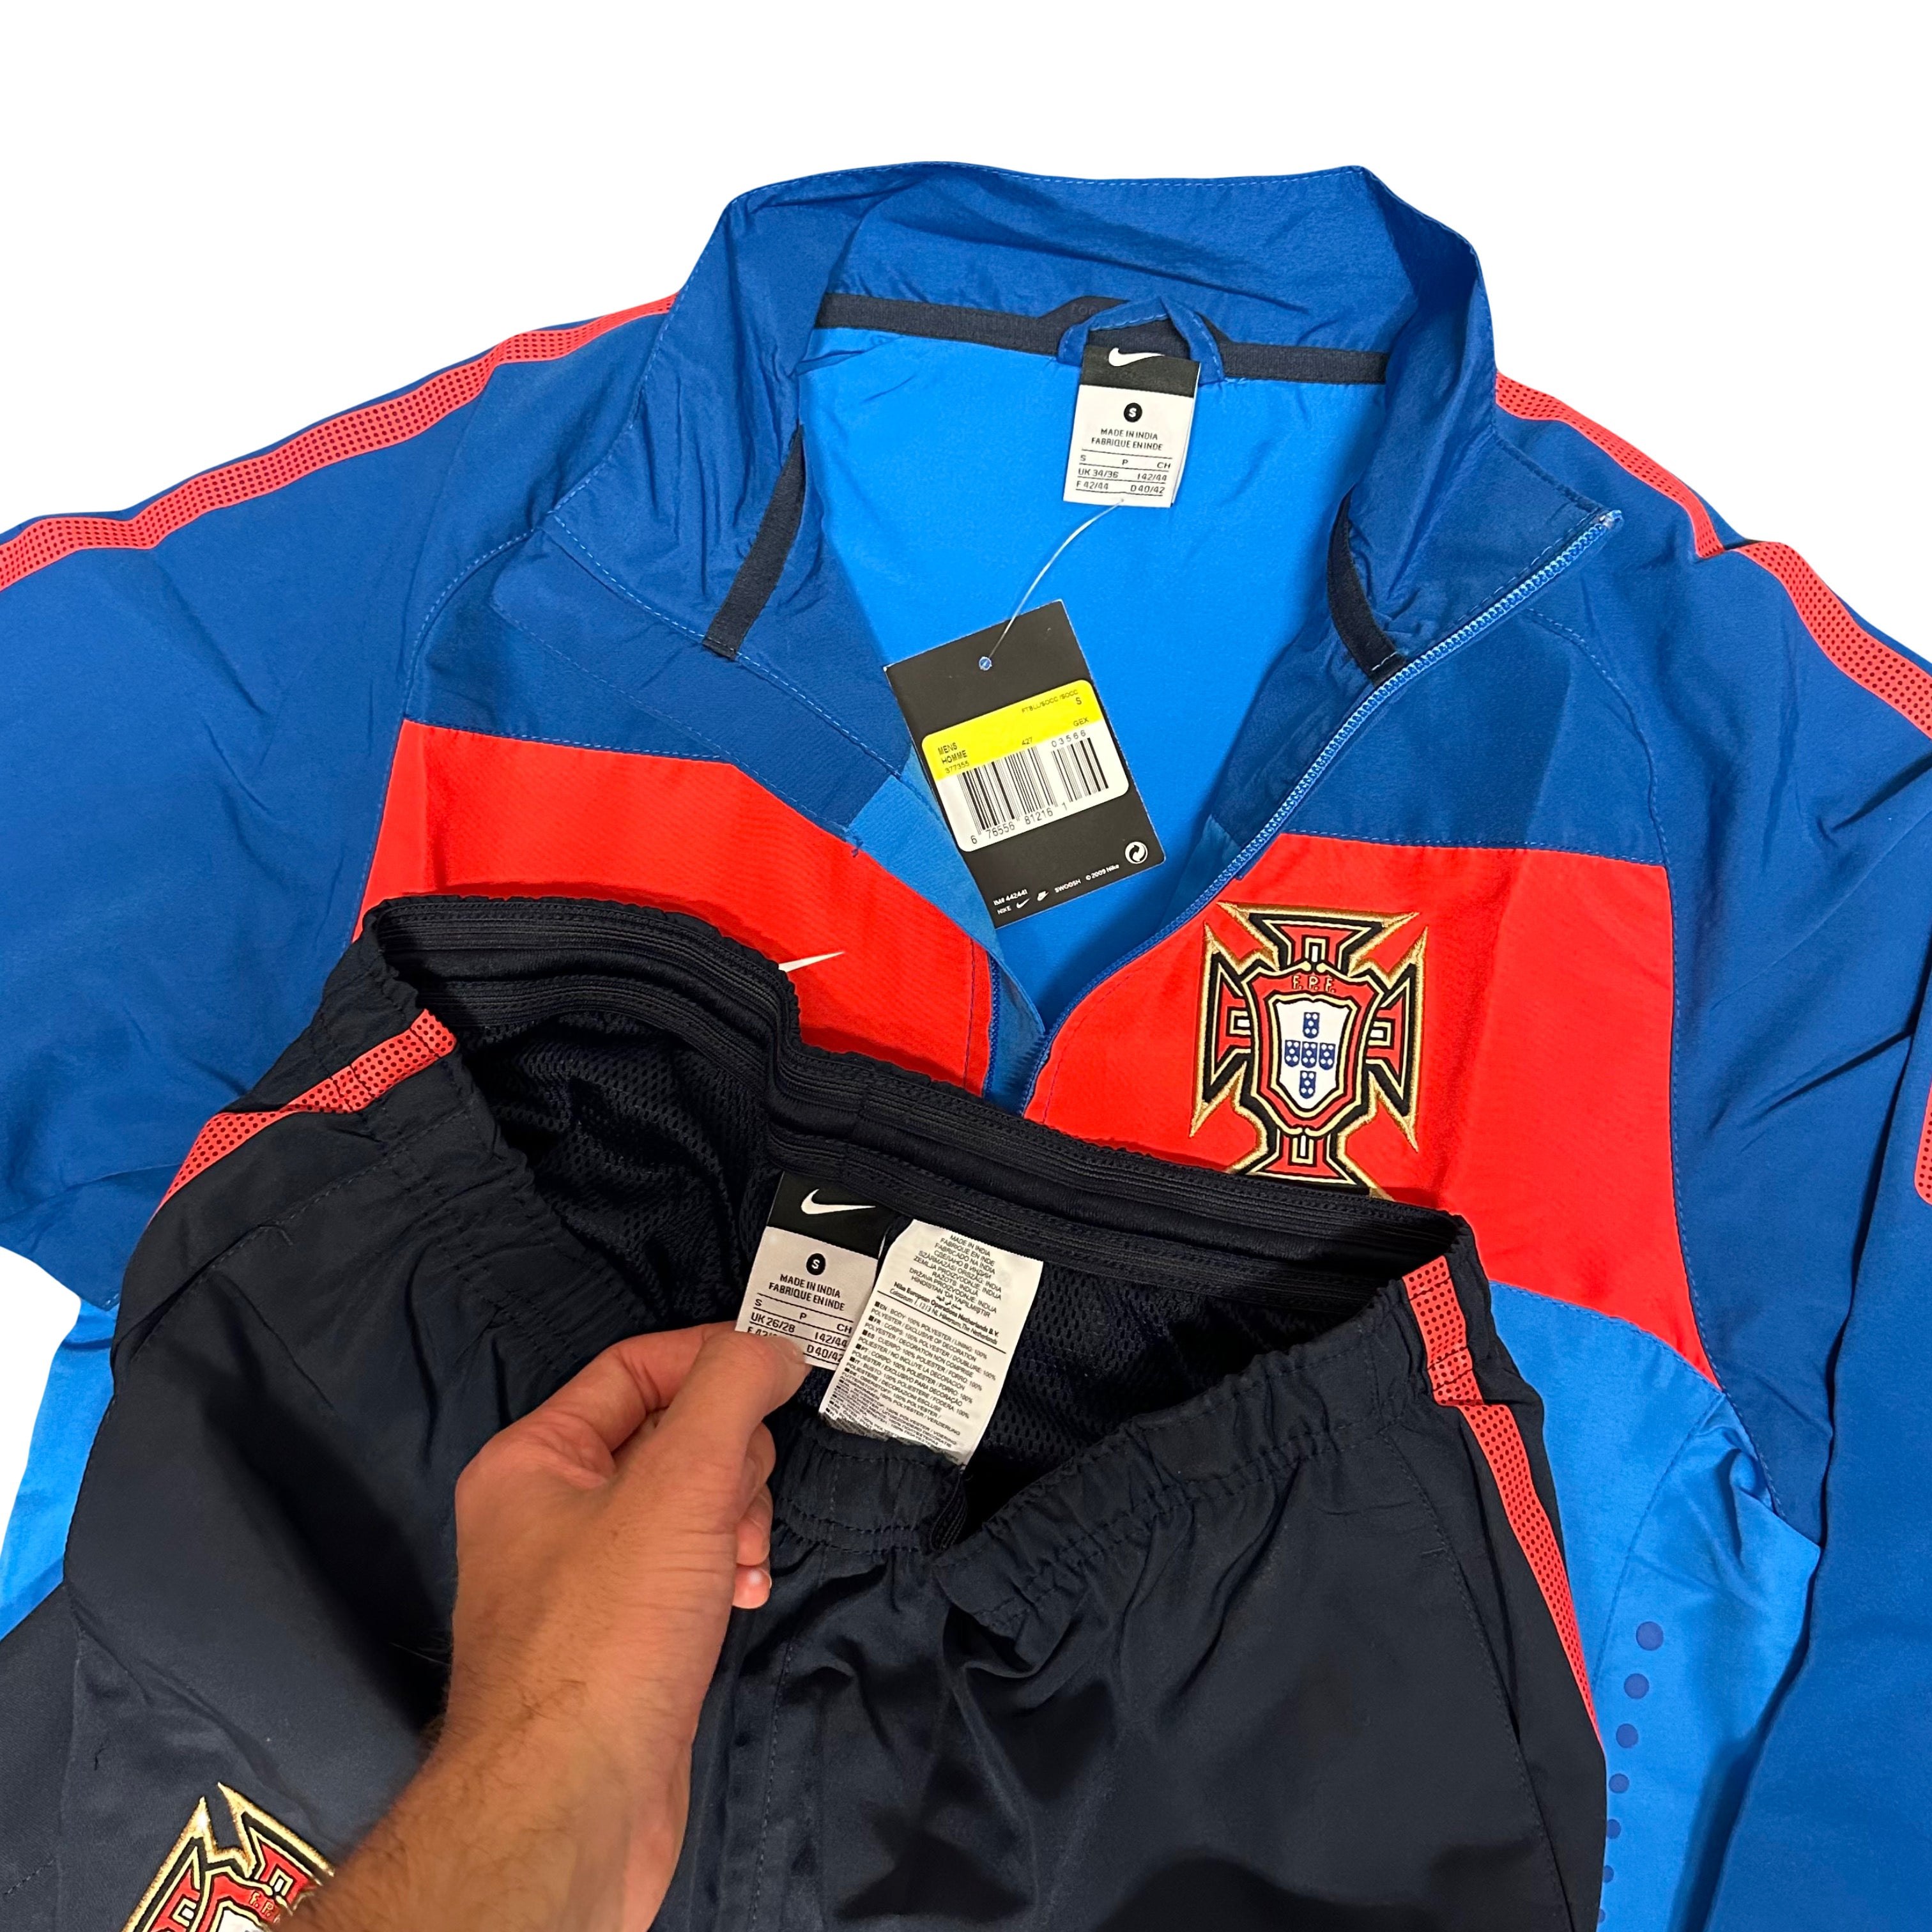 Nike Portugal 2010/11 Tracksuit ( S )